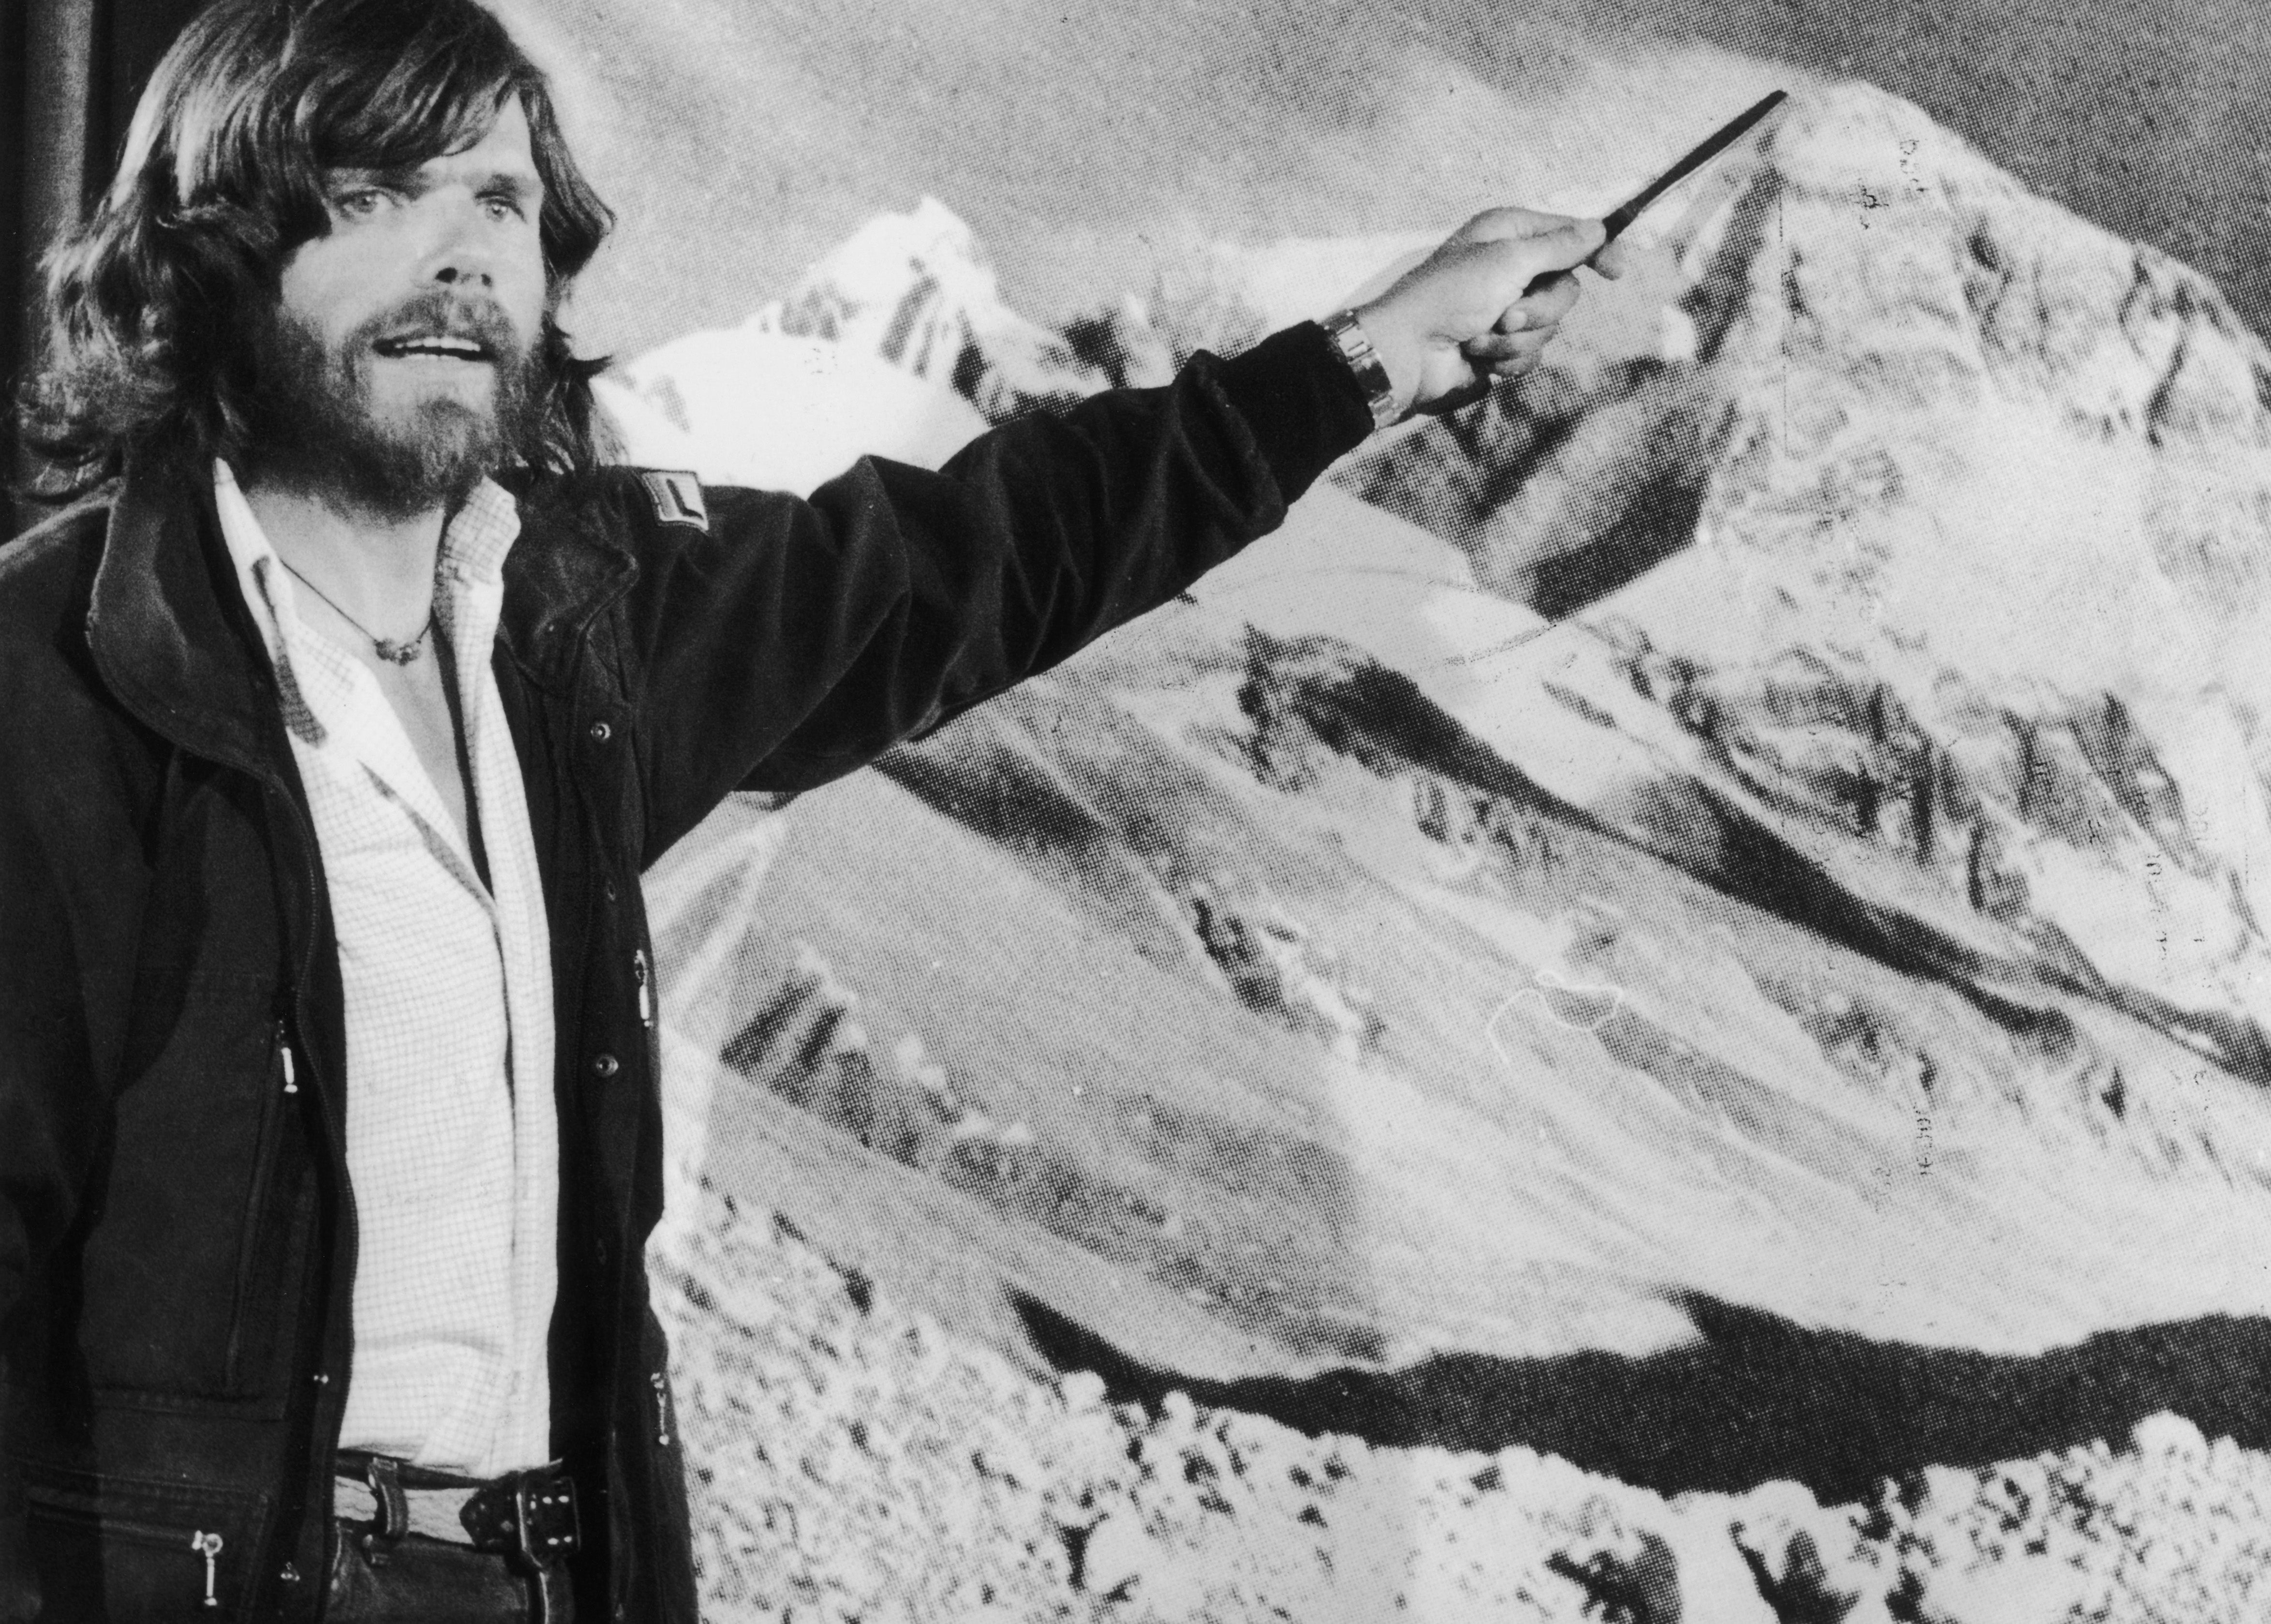 Messner points to a photograph of Mount Everest after his unprecedented solo ascent without supplementary oxygen, in 1980